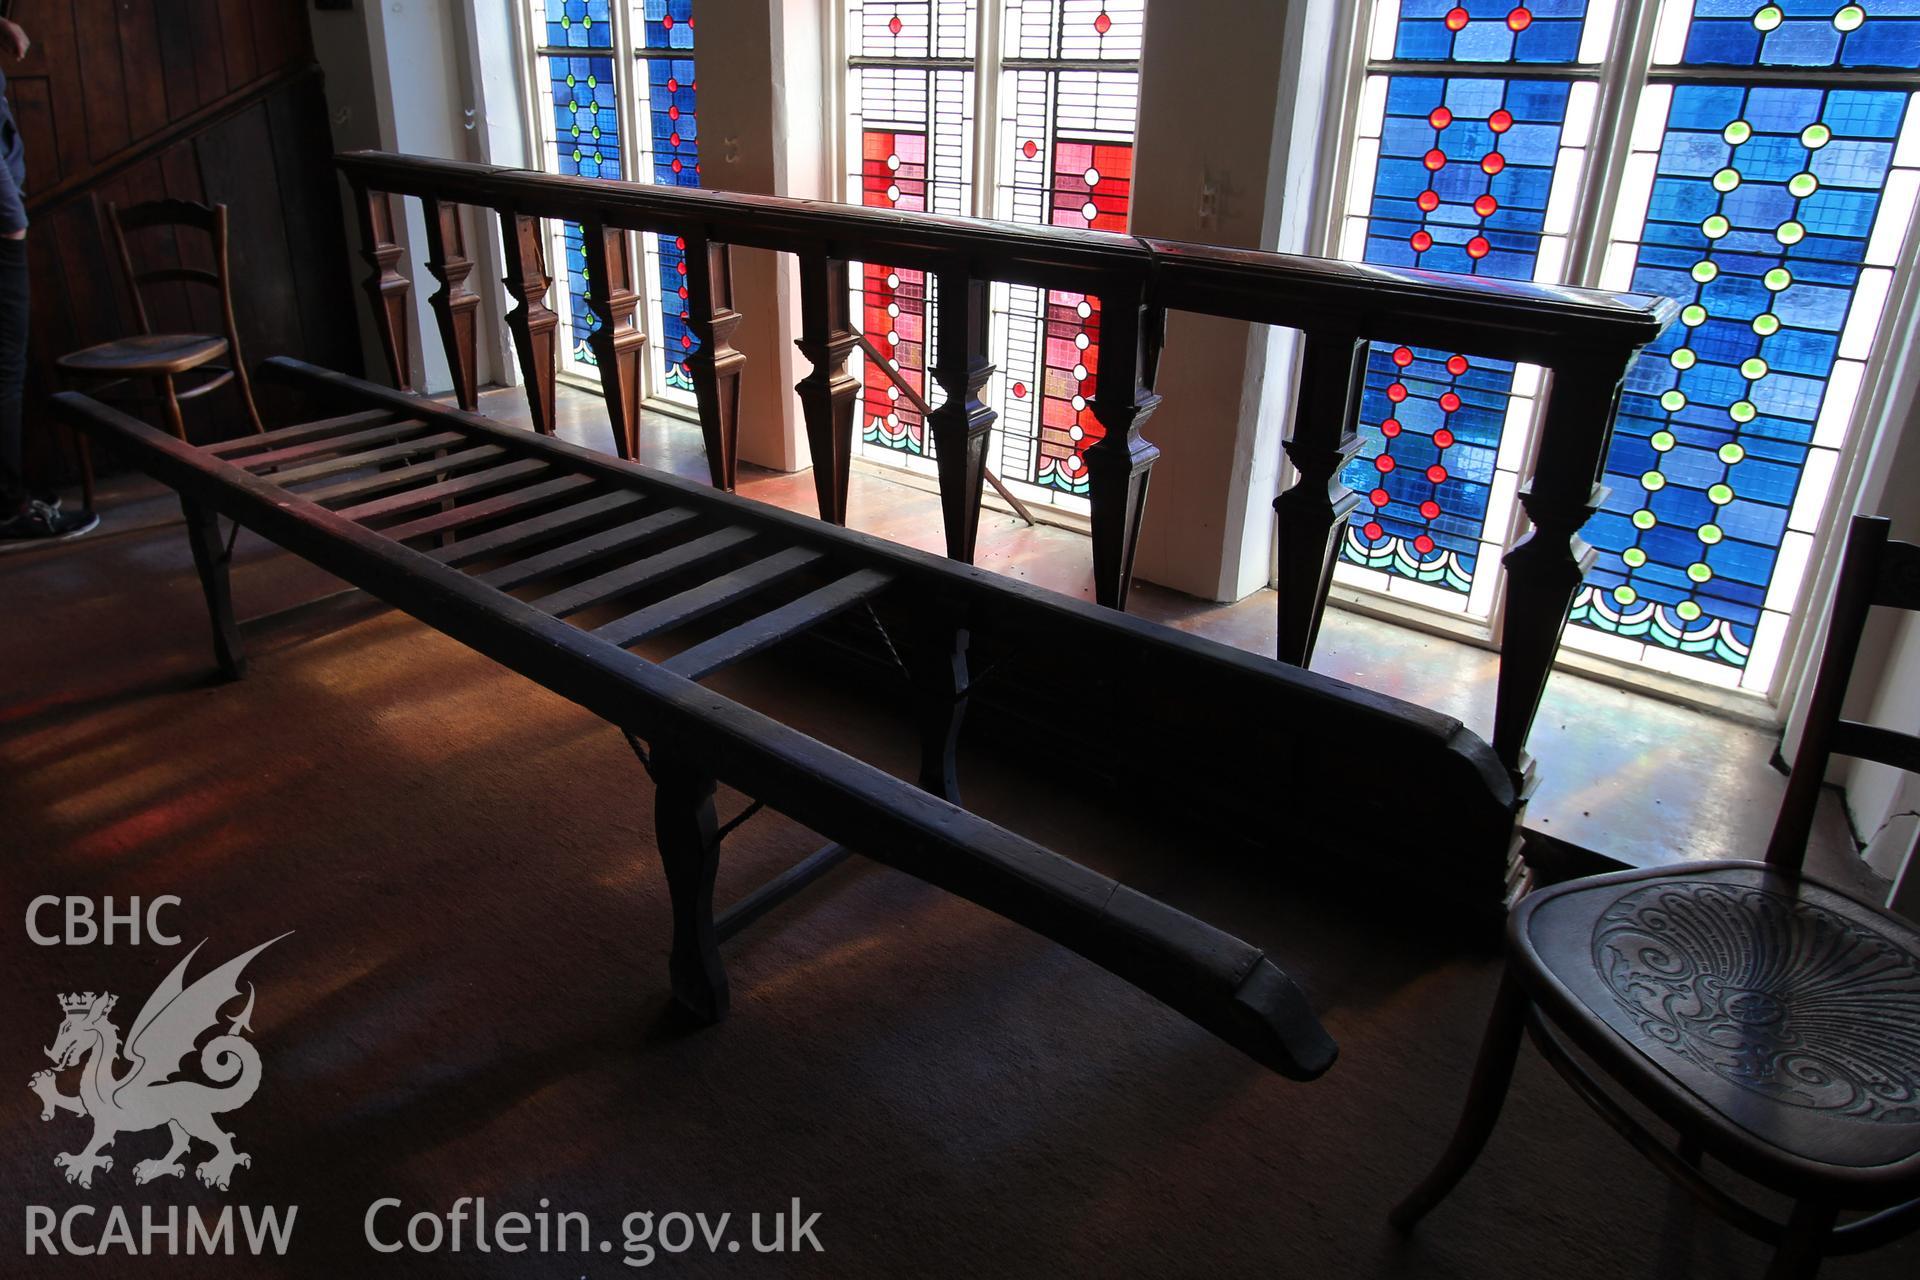 Interior view of stained glass windows and wooden seating. Photographic survey of Seion Welsh Baptist Chapel, Morriston, conducted by Sue Fielding on 13th May 2017.